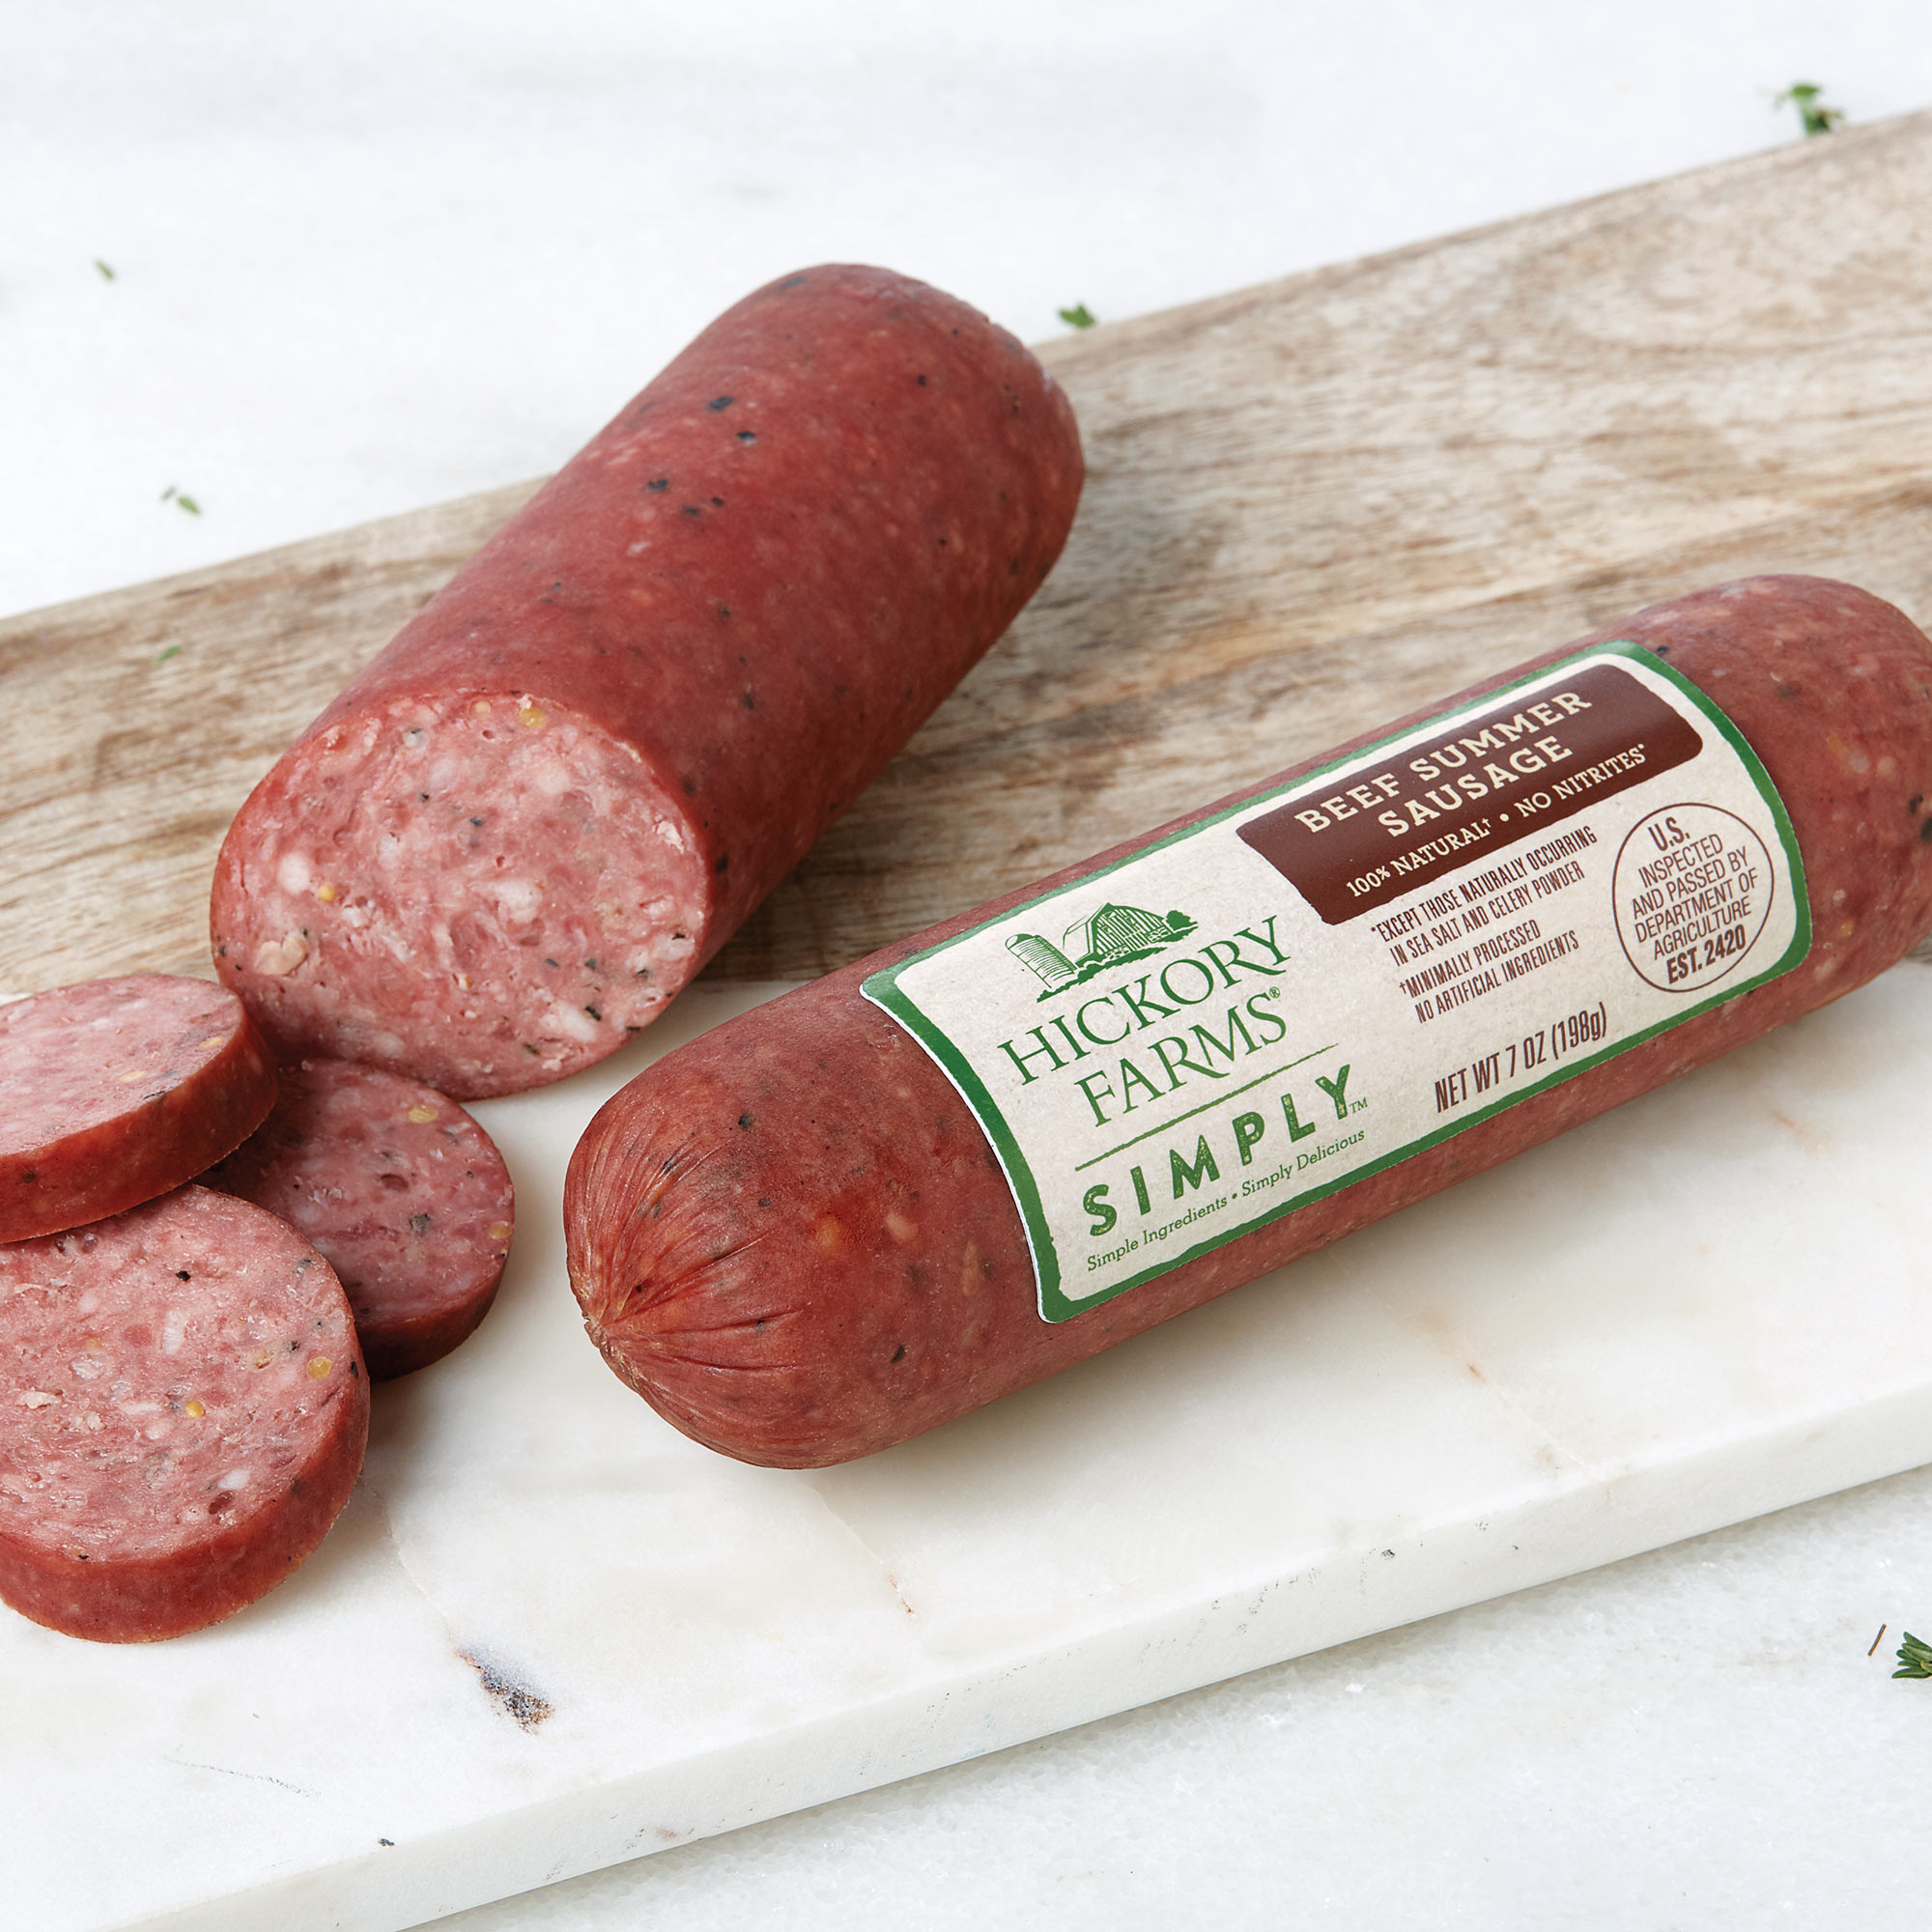 Hickory Farms Beef Summer Sausage
 Hickory Farms Simply Natural Beef Summer Sausage